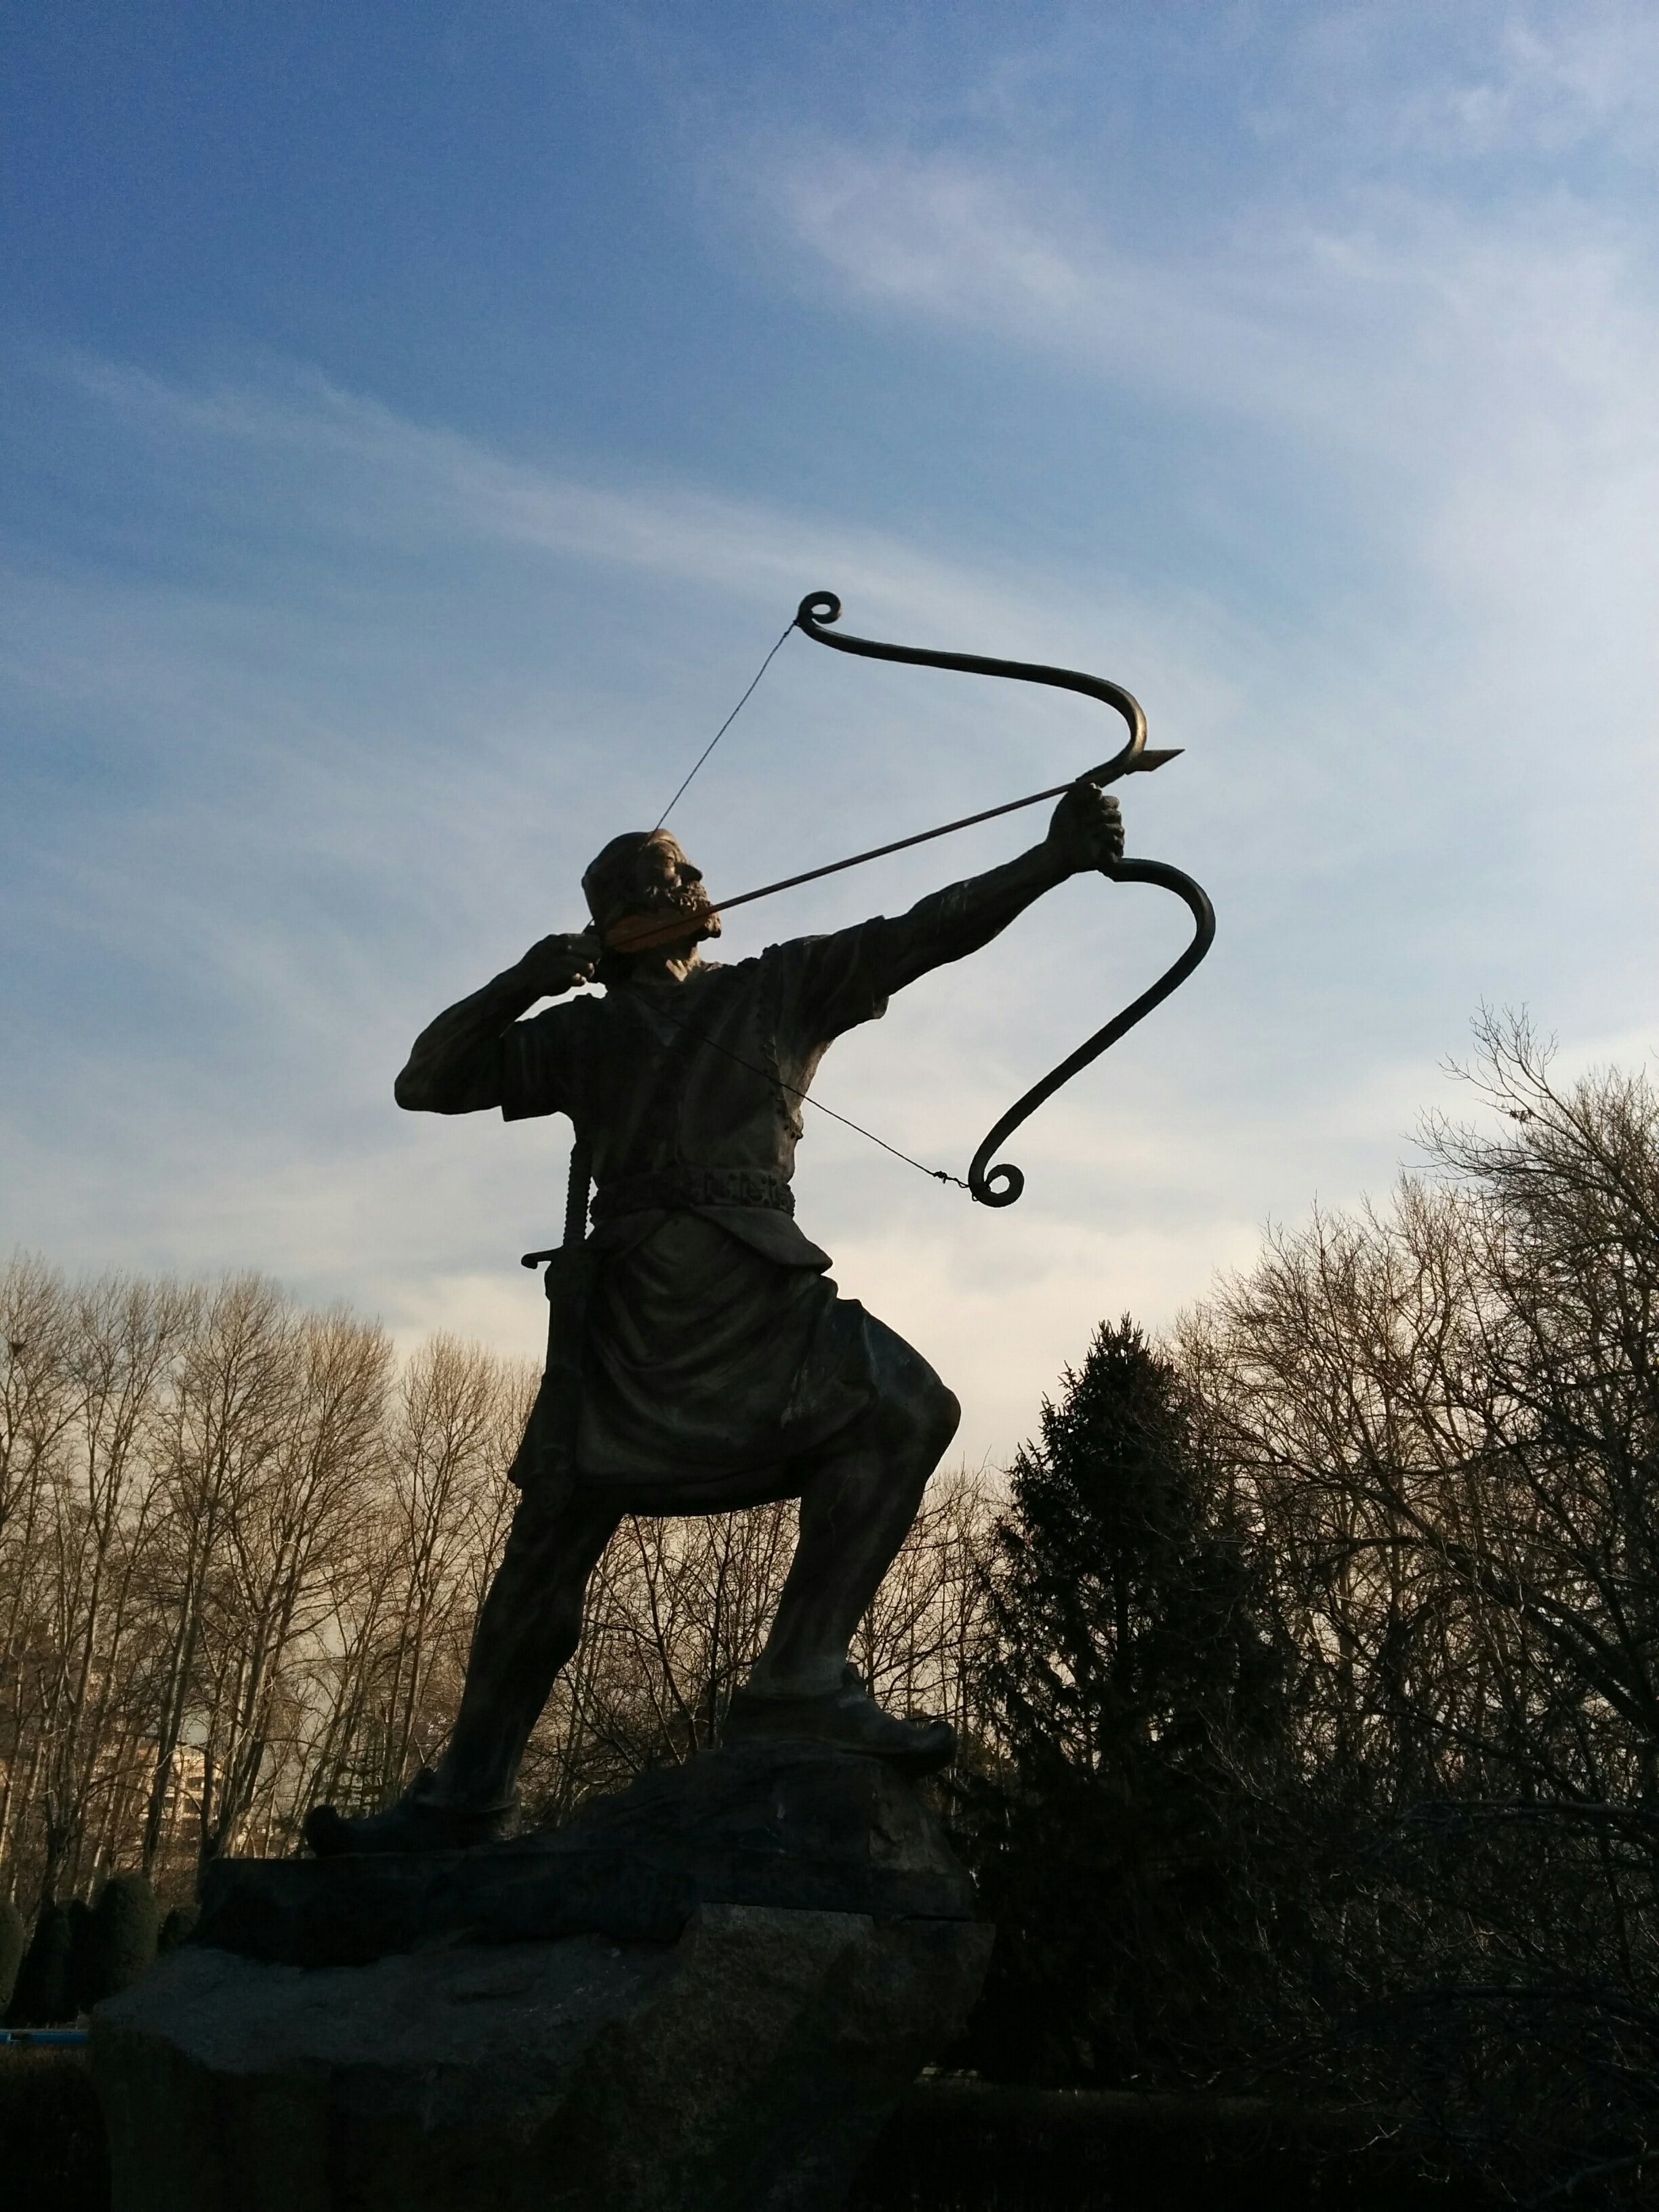 A statue of a man shooting a bow and arrow. | Source: Unsplash